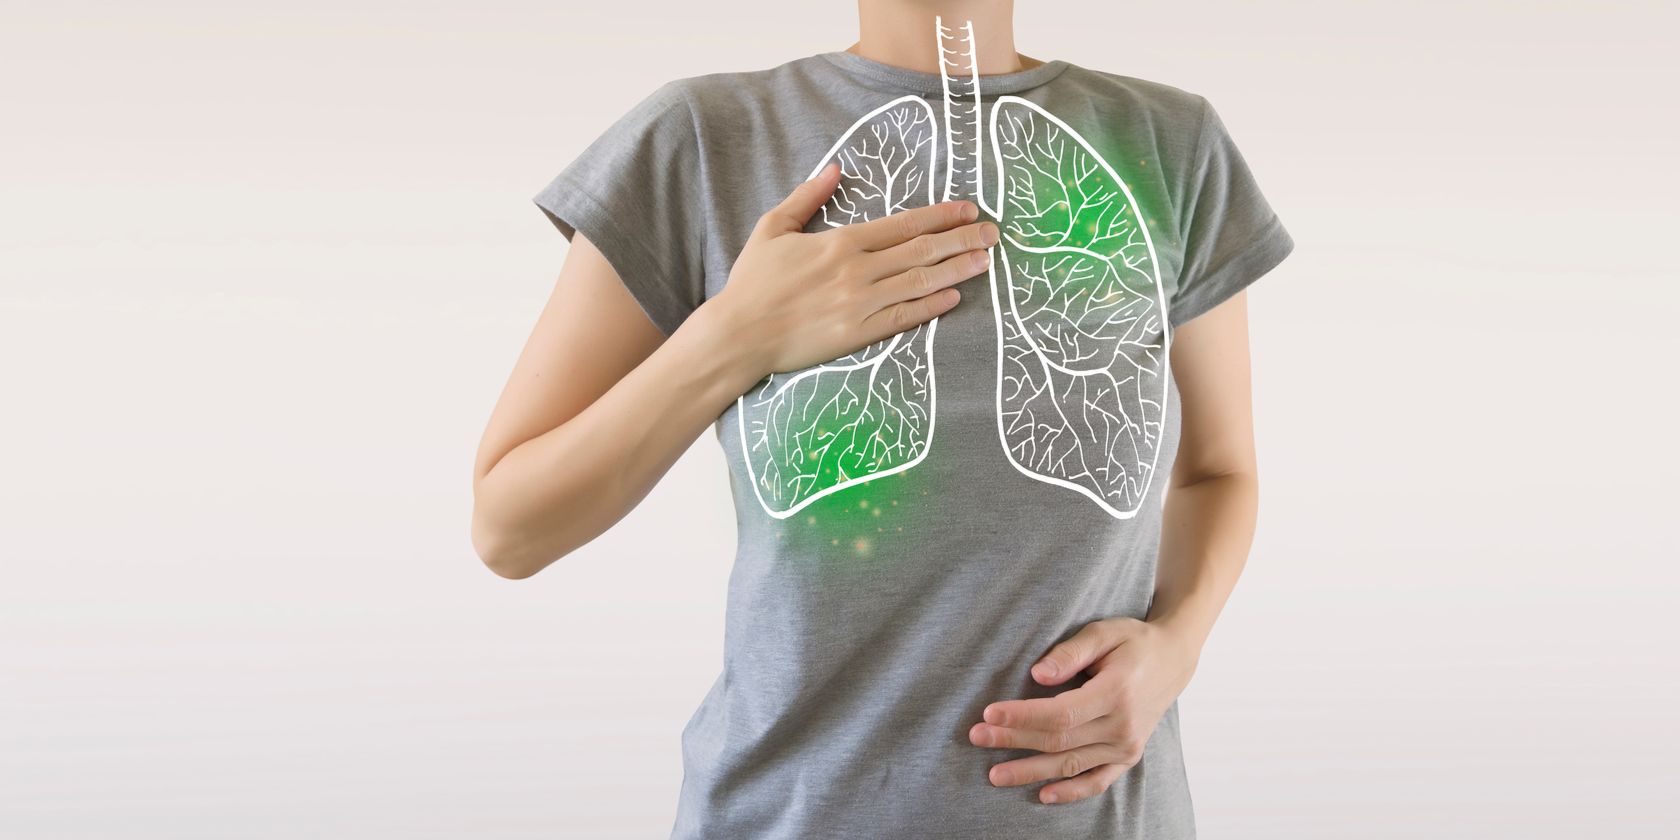 Woman with lungs superimposed on body touching chest